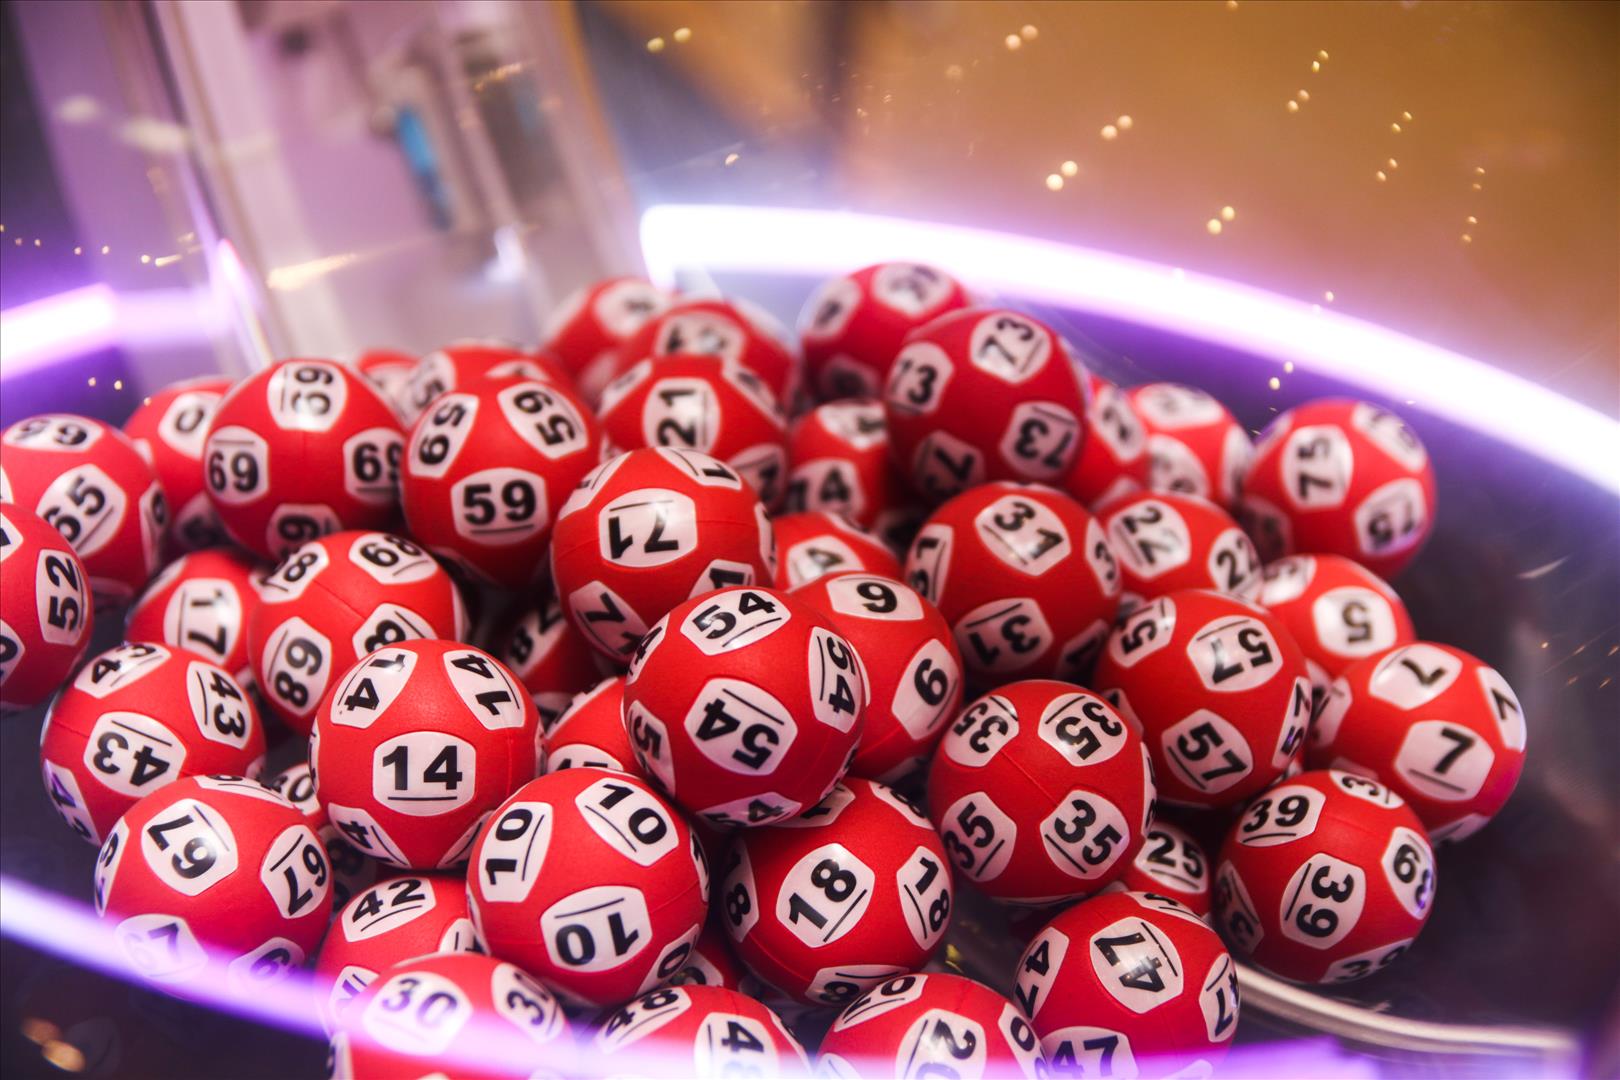 433 People Win A Lottery Jackpot  Impossible? Probability And Psychology Suggest It's More Likely Than You'd Think